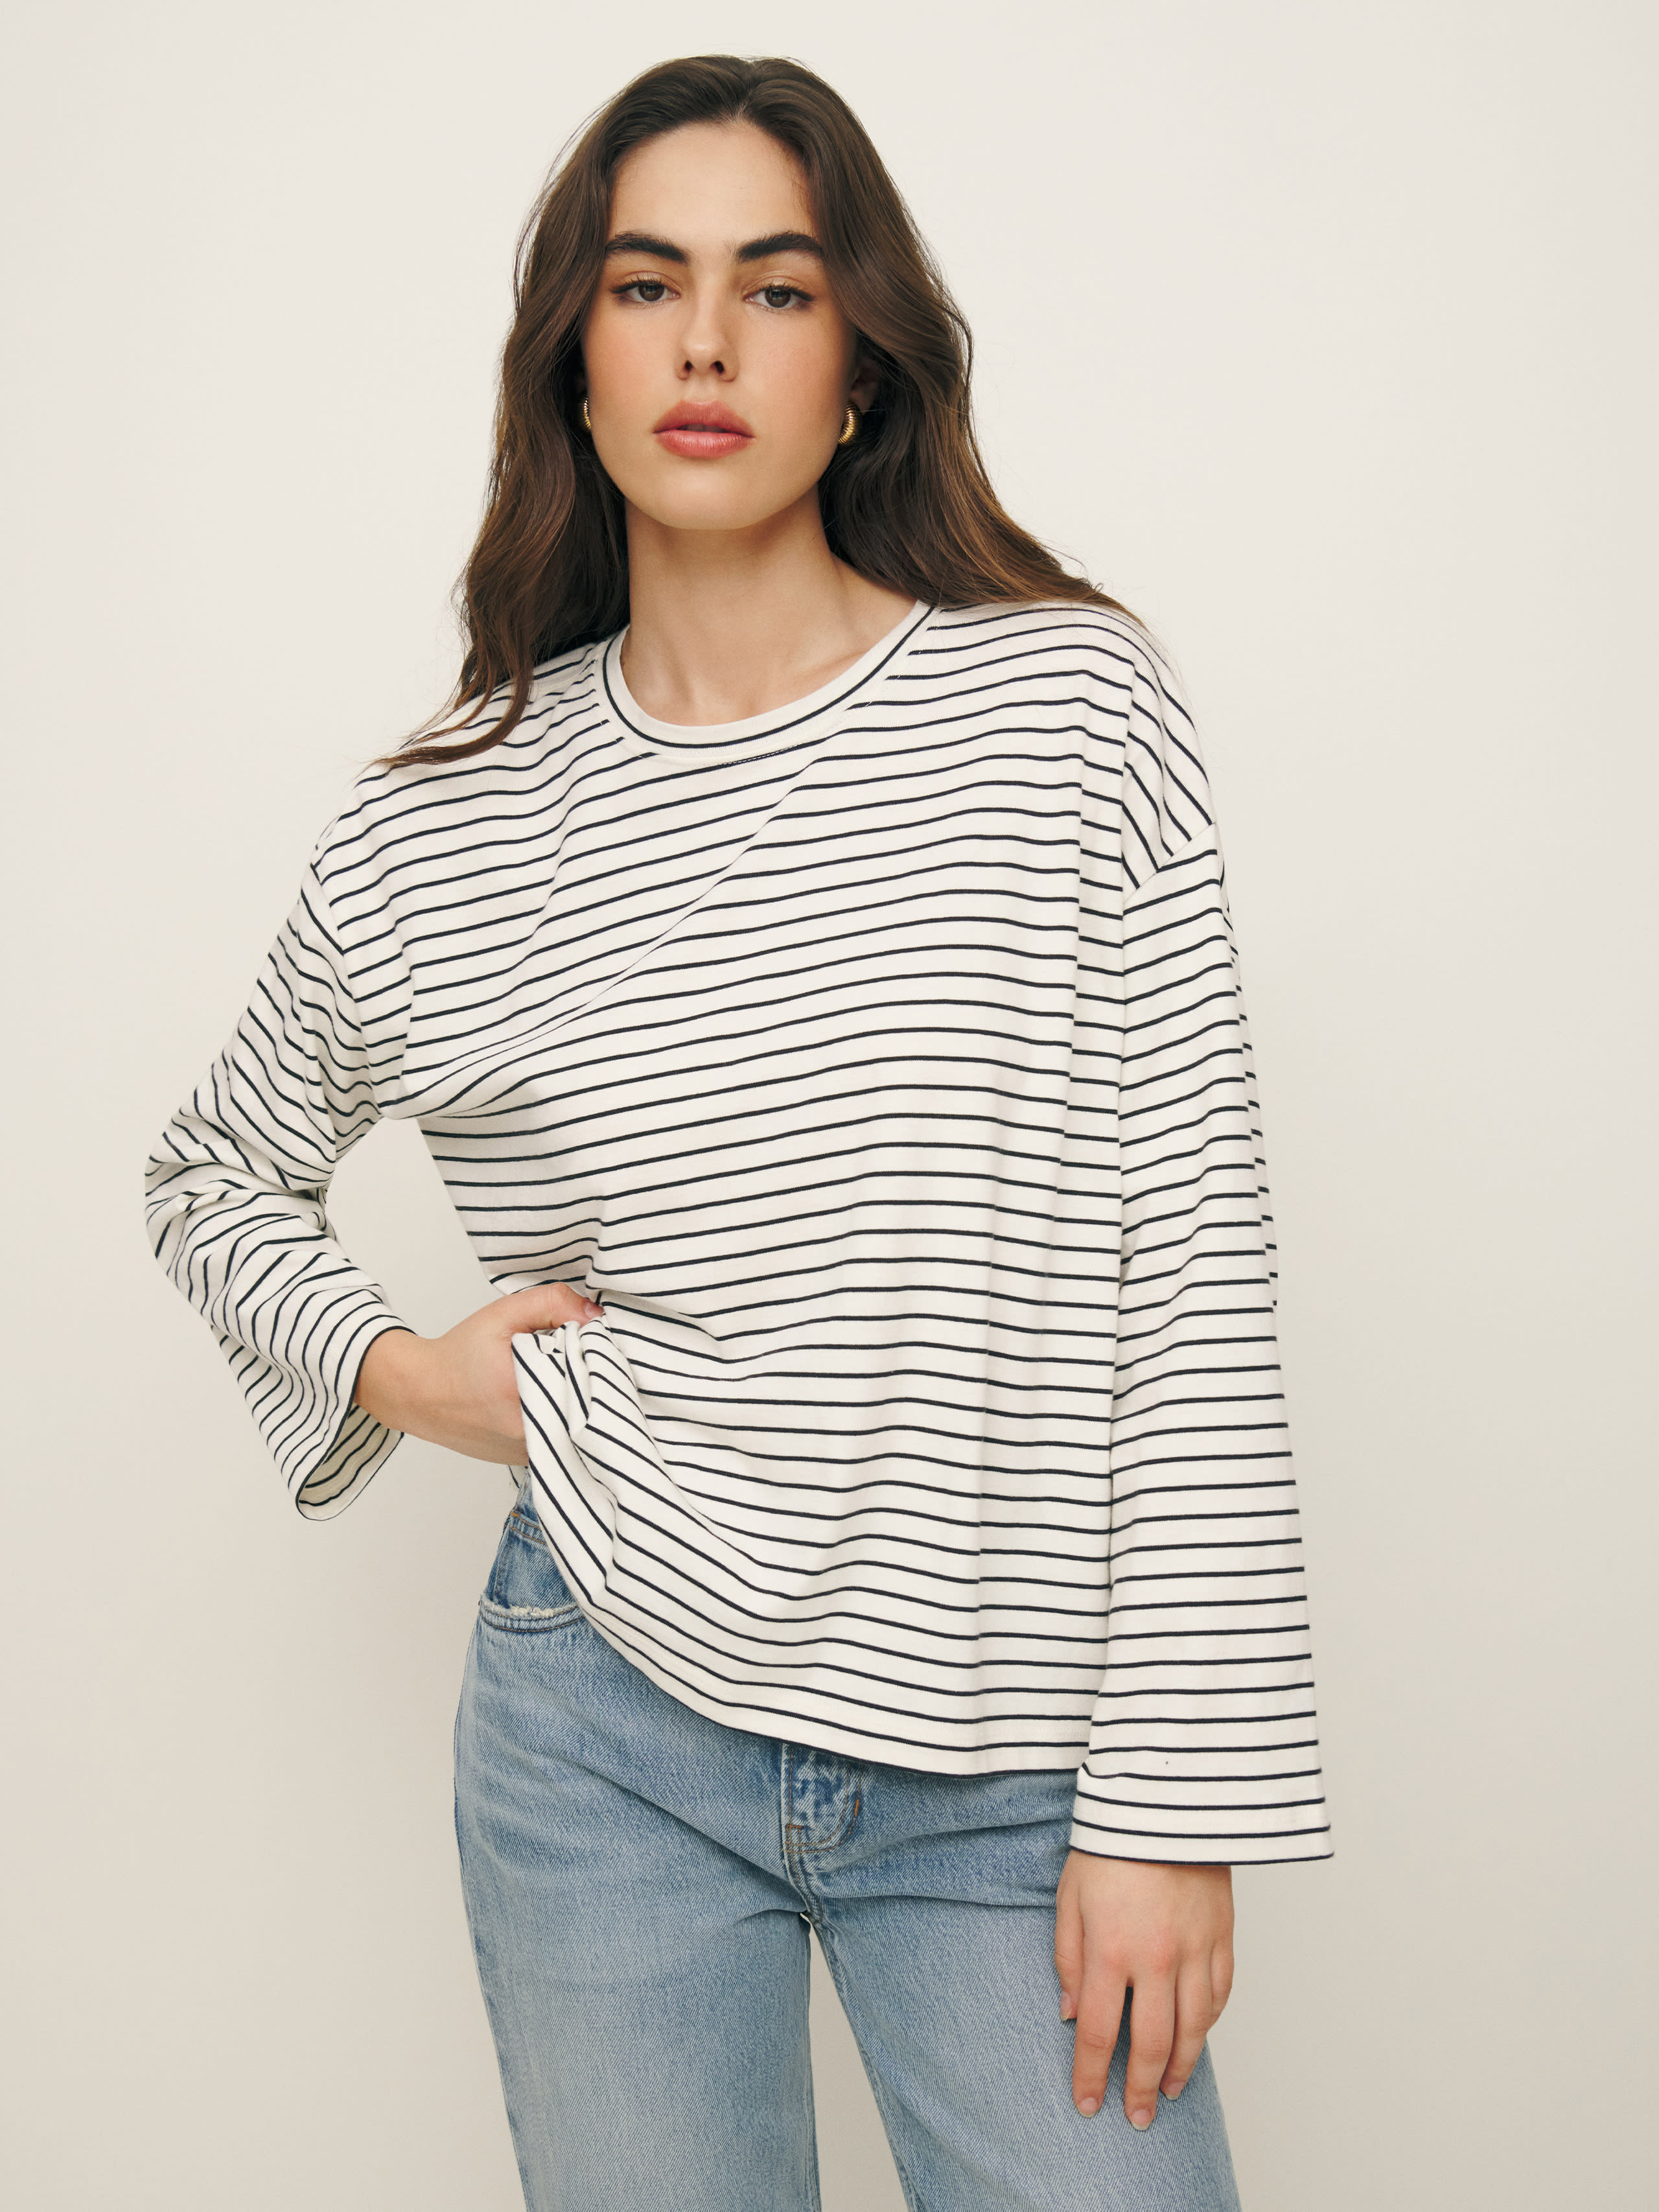 Reformation Oversized Long Sleeve Tee In Black And White Stripe